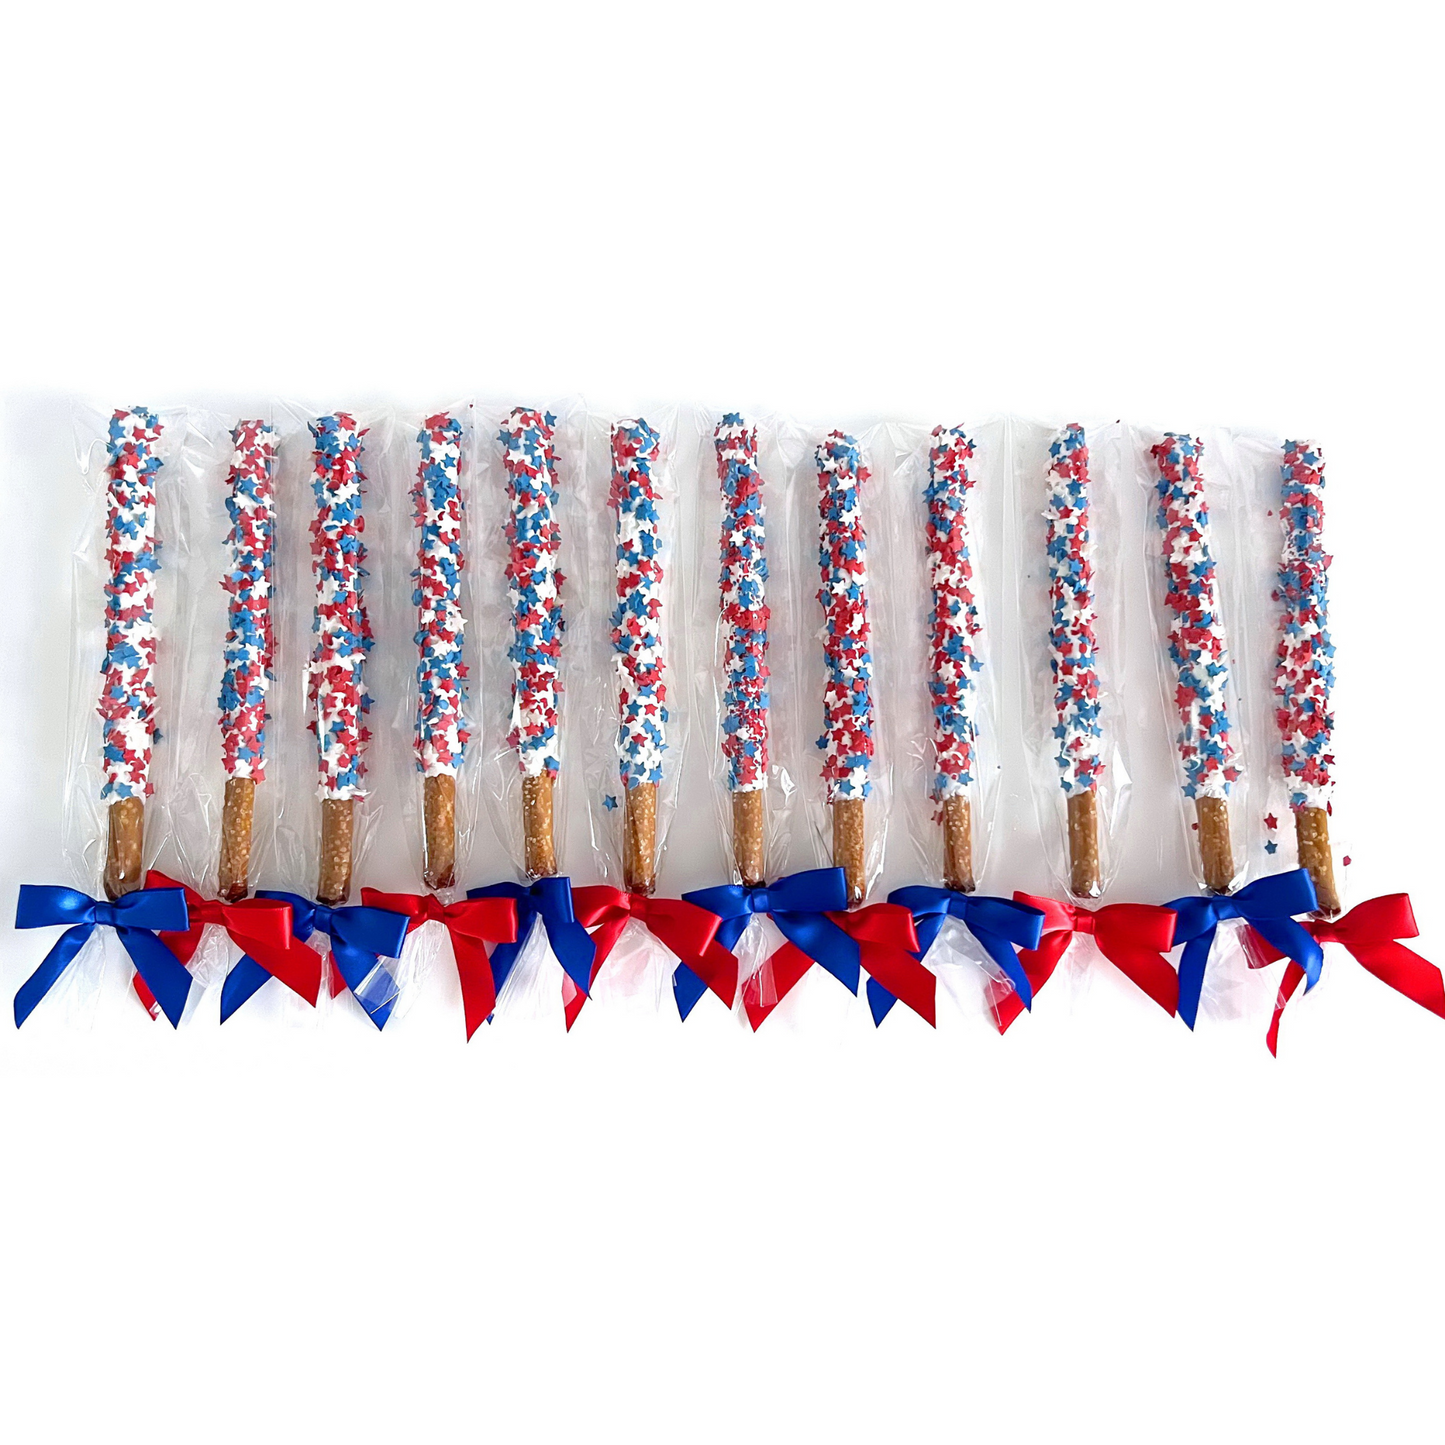 Patriotic White Chocolate Covered Pretzel Rods - Topped With Red, White, & Blue Stars